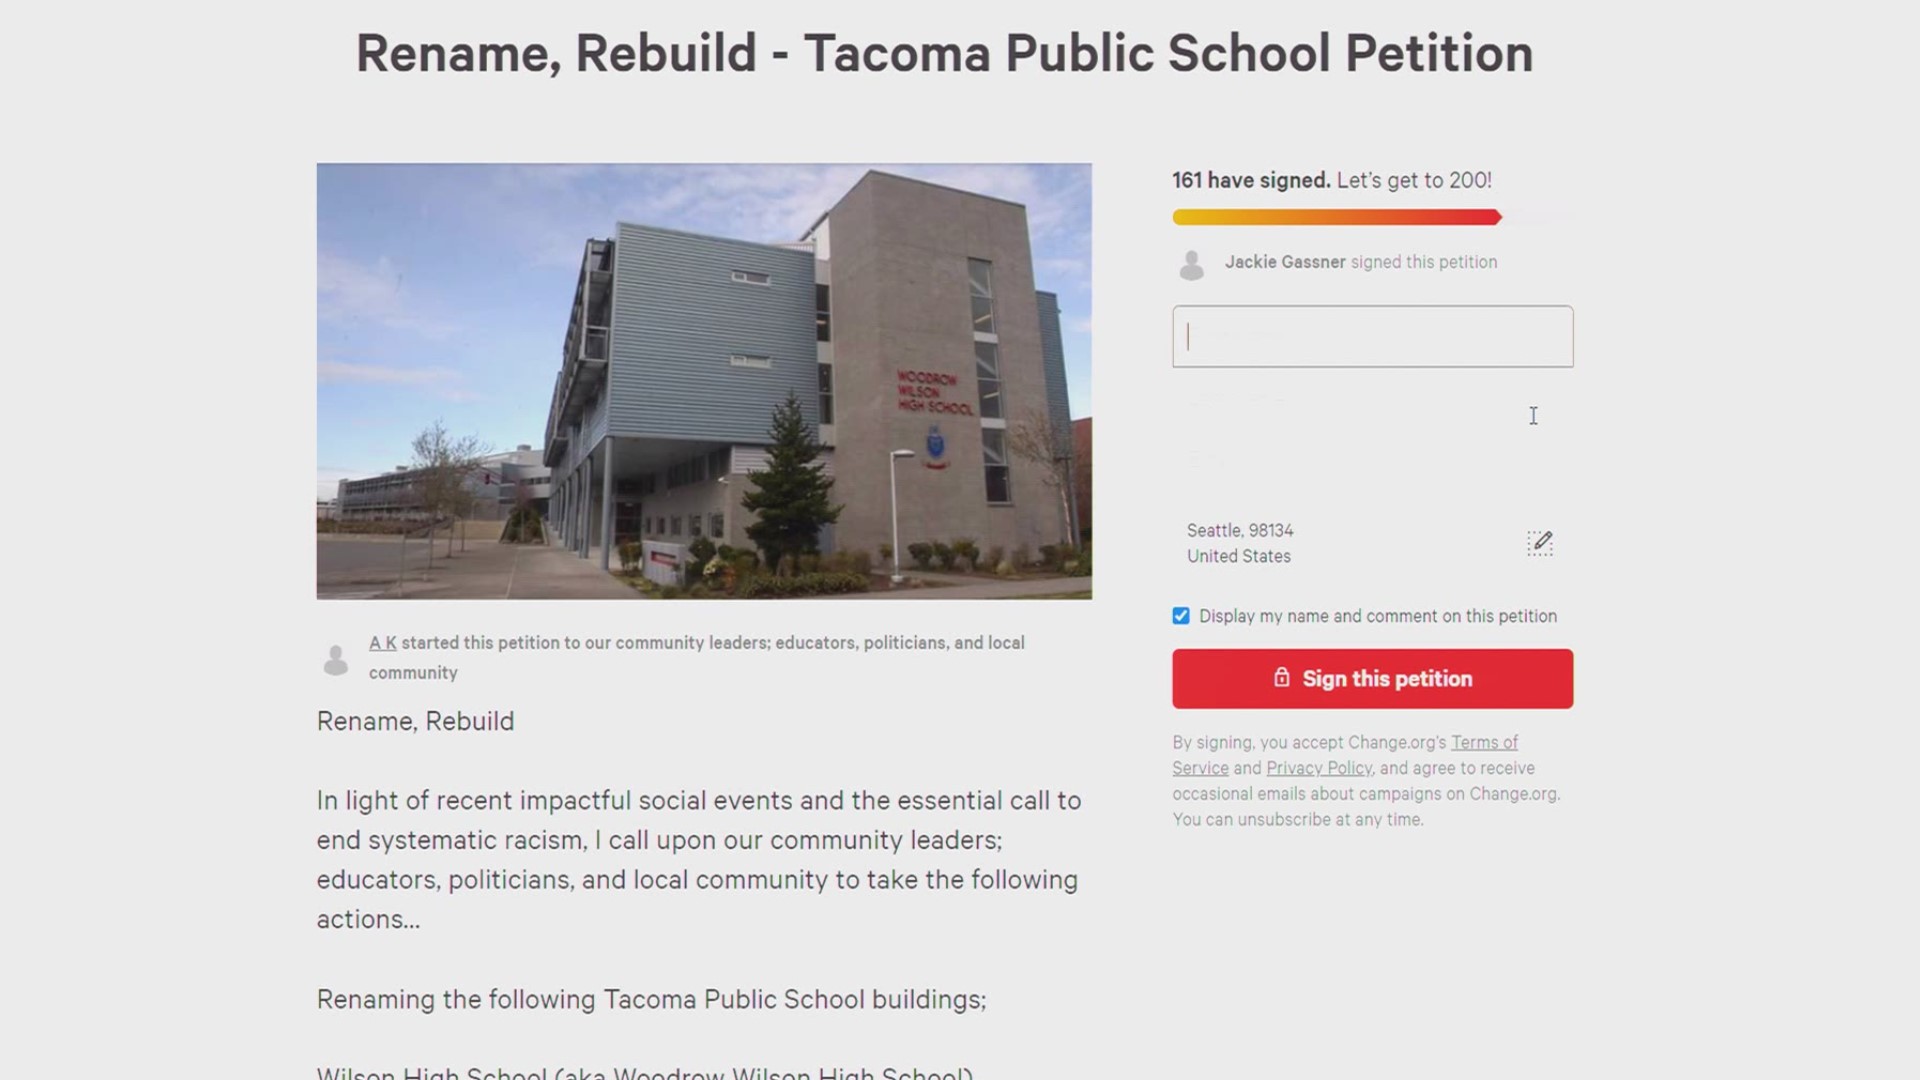 The principals at two Tacoma Public Schools are petitioning to change the names of their schools because of connections to racist history.